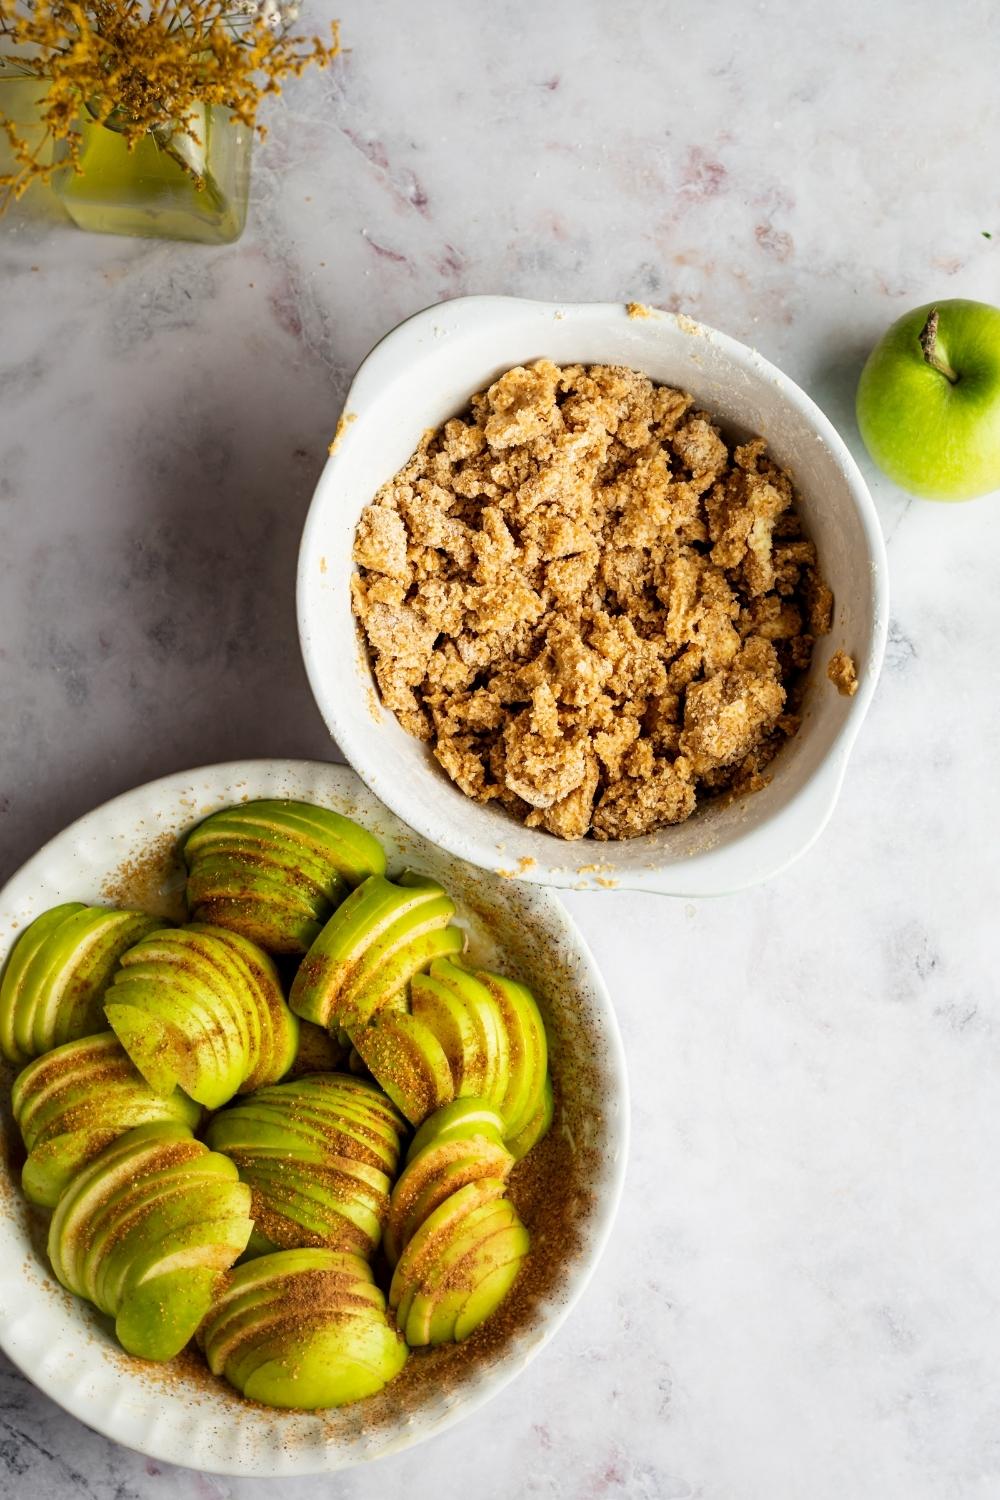 A baking dish filled with sliced apples and a bowl with apple crumble in it.